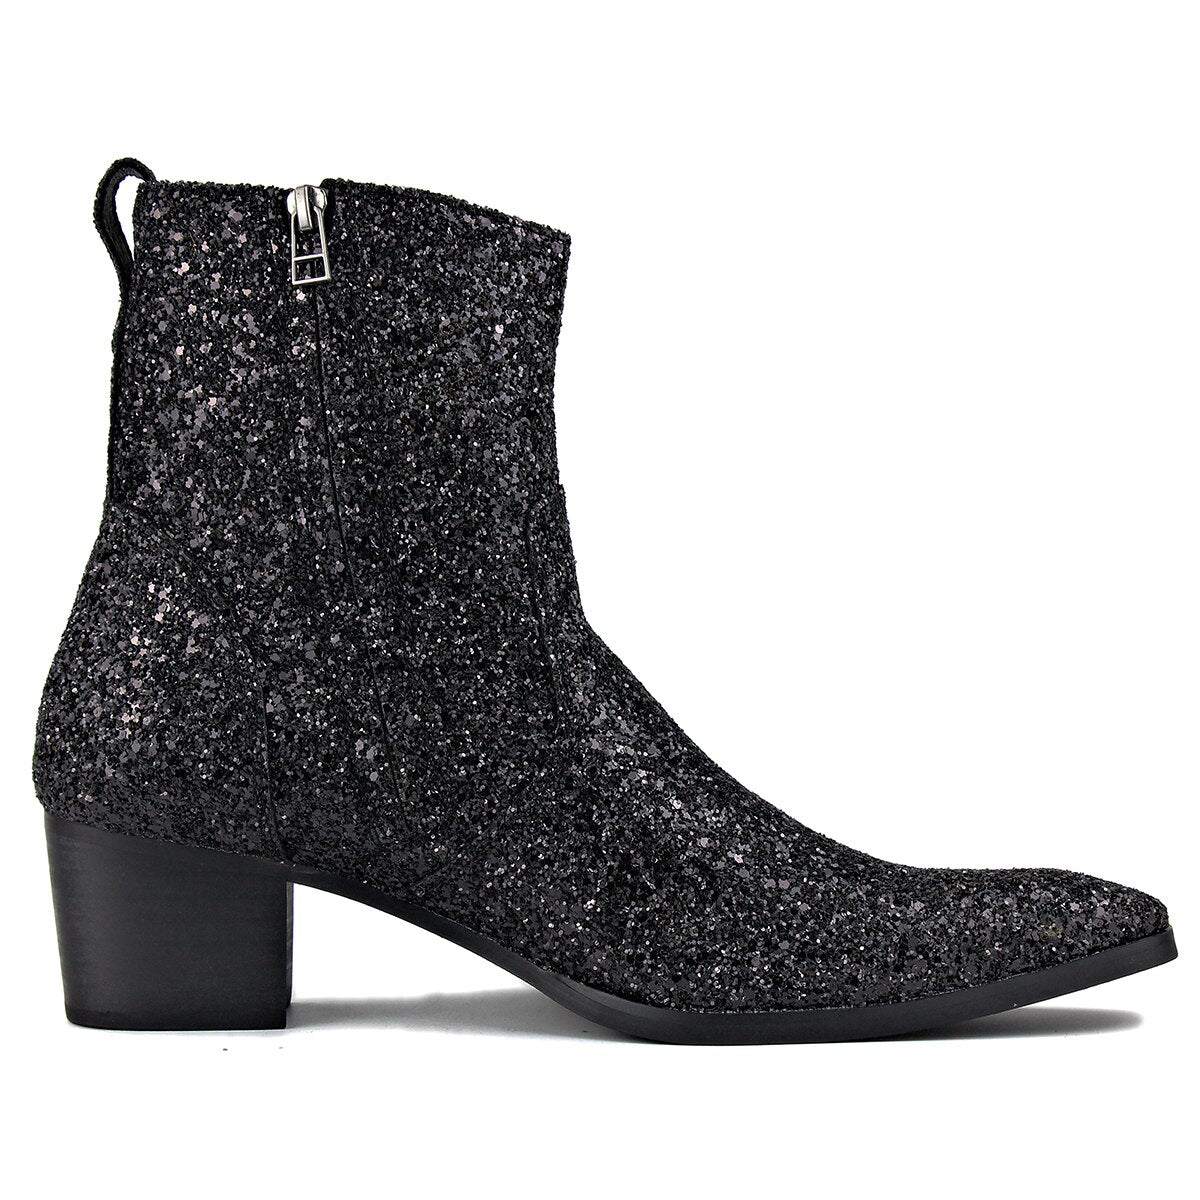 Fordan Glitter Genuine Leather Ankle Boots